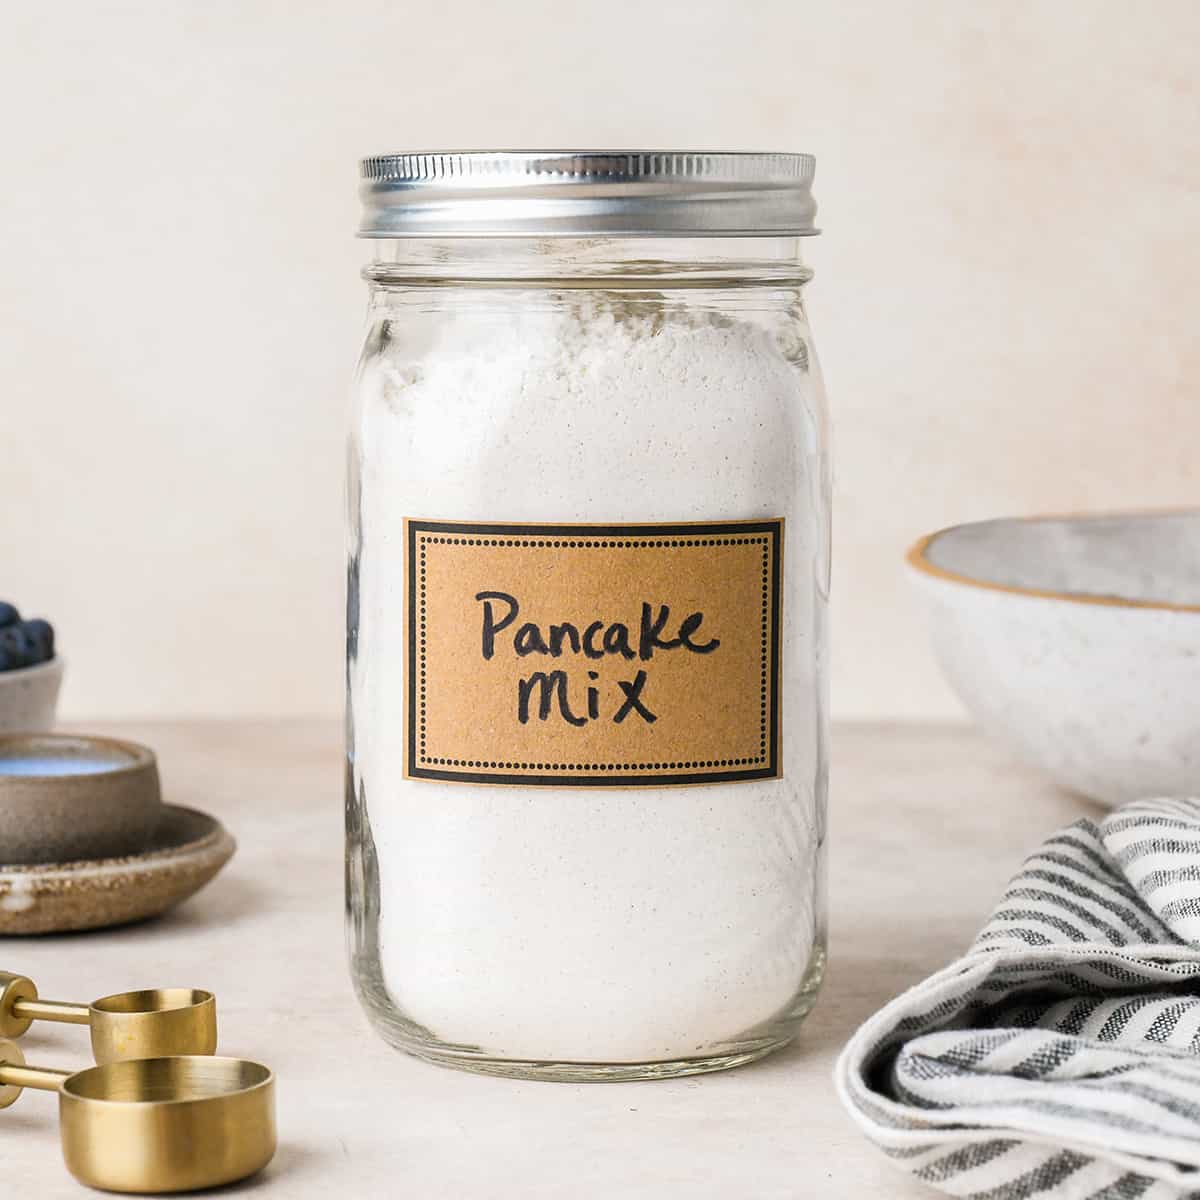 Homemade Pancake Mix in a jar with a label